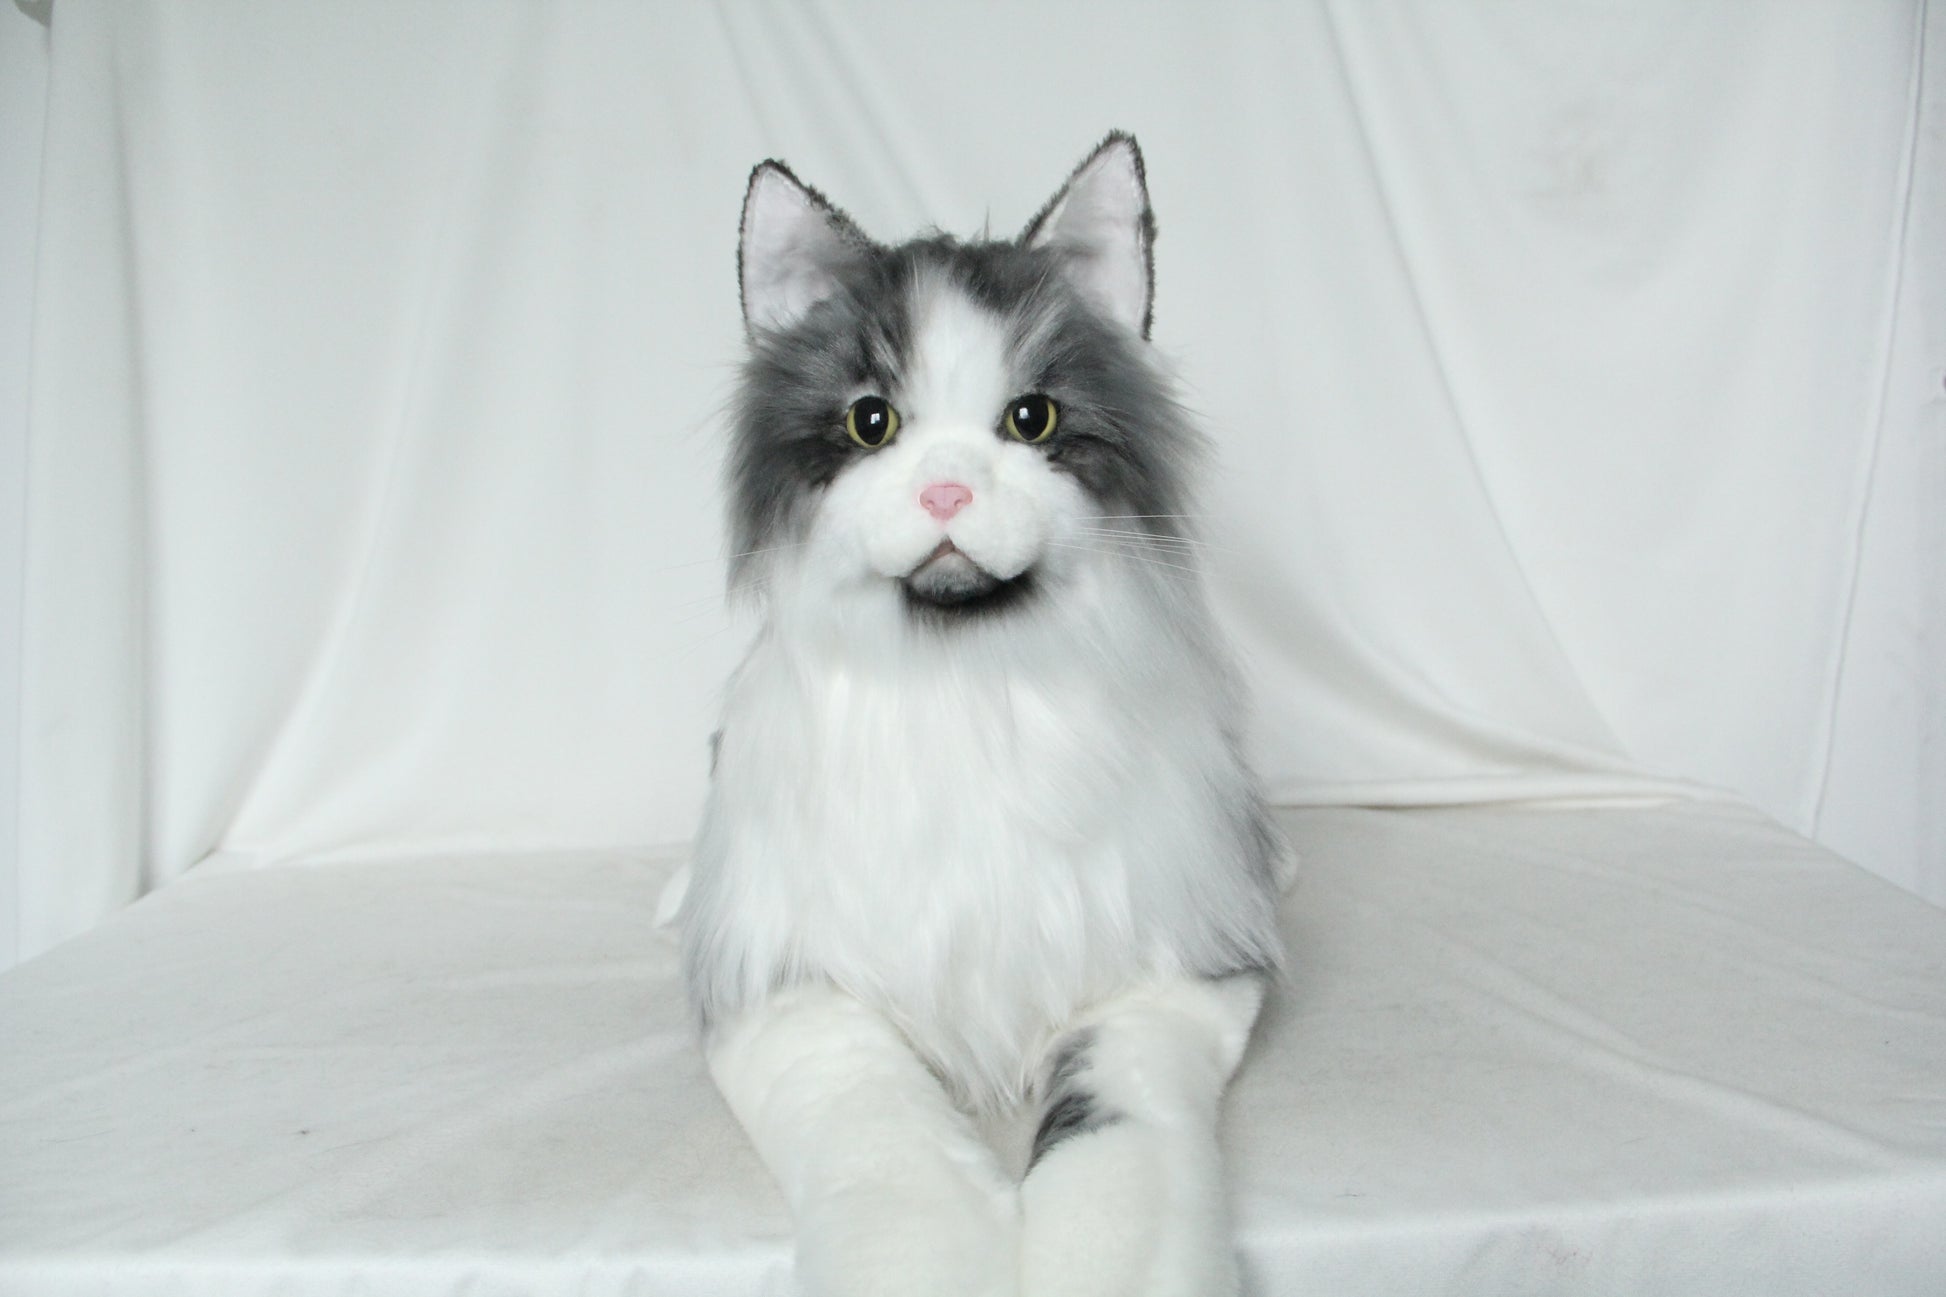 NO.37 55cm Long-haired gray cat in lying position - Chongker